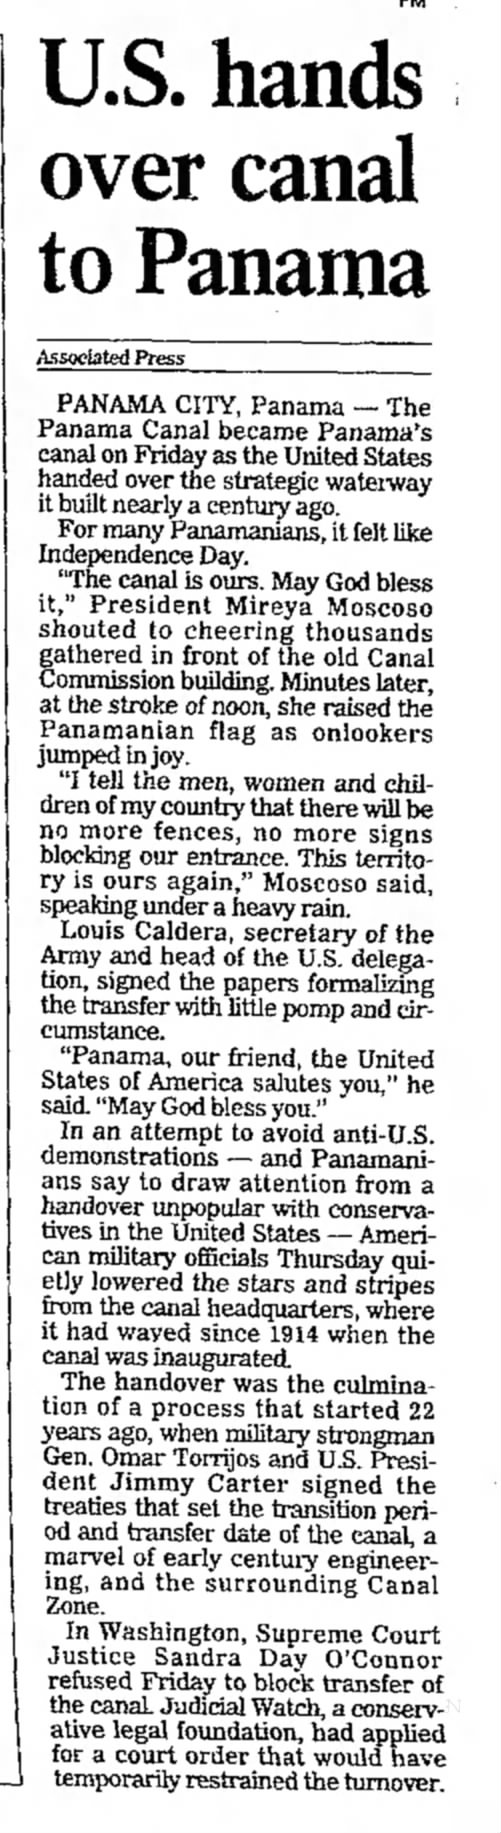 U.S. hands over canal to Panama